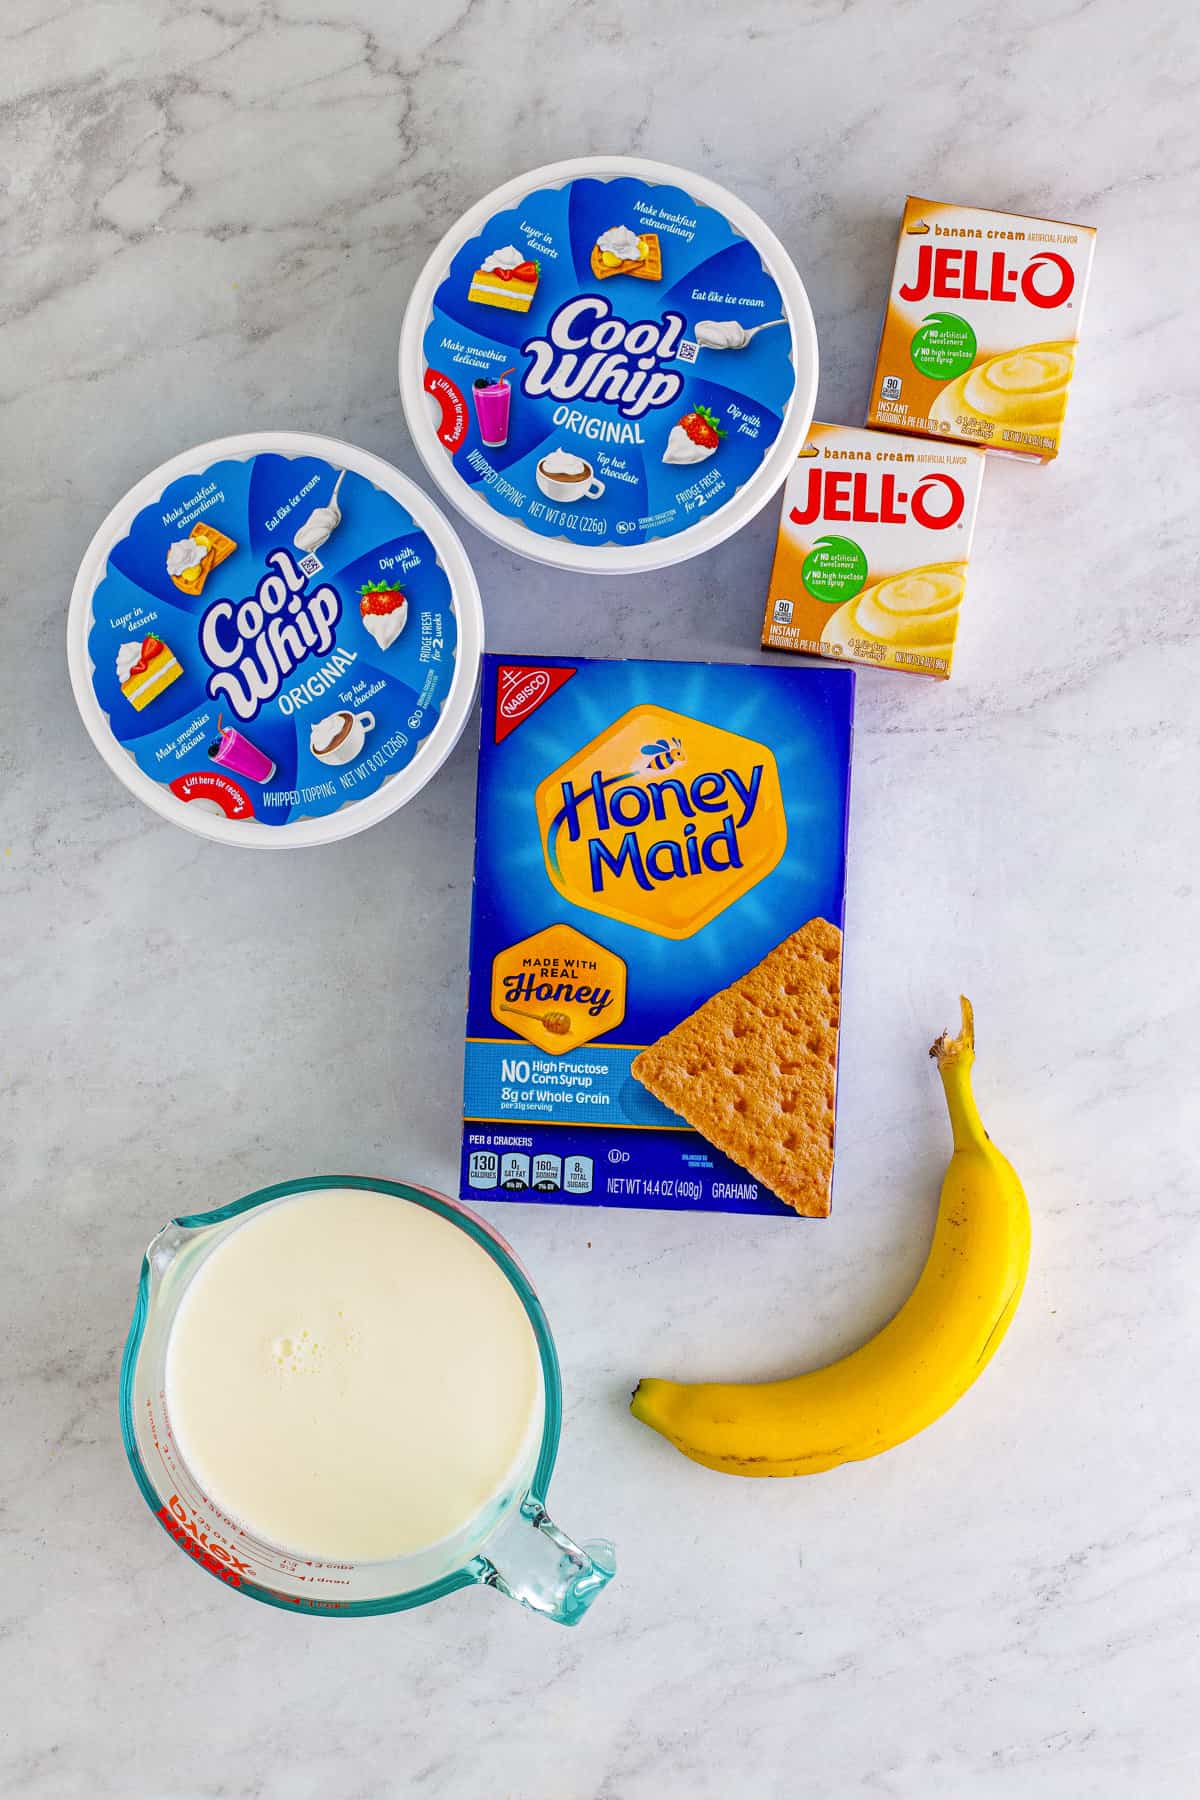 Two containers of Cool Whip, 2 boxes of vanilla instant pudding mix, a box of honey maid graham crackers, a banana, and a measuring cup of milk.